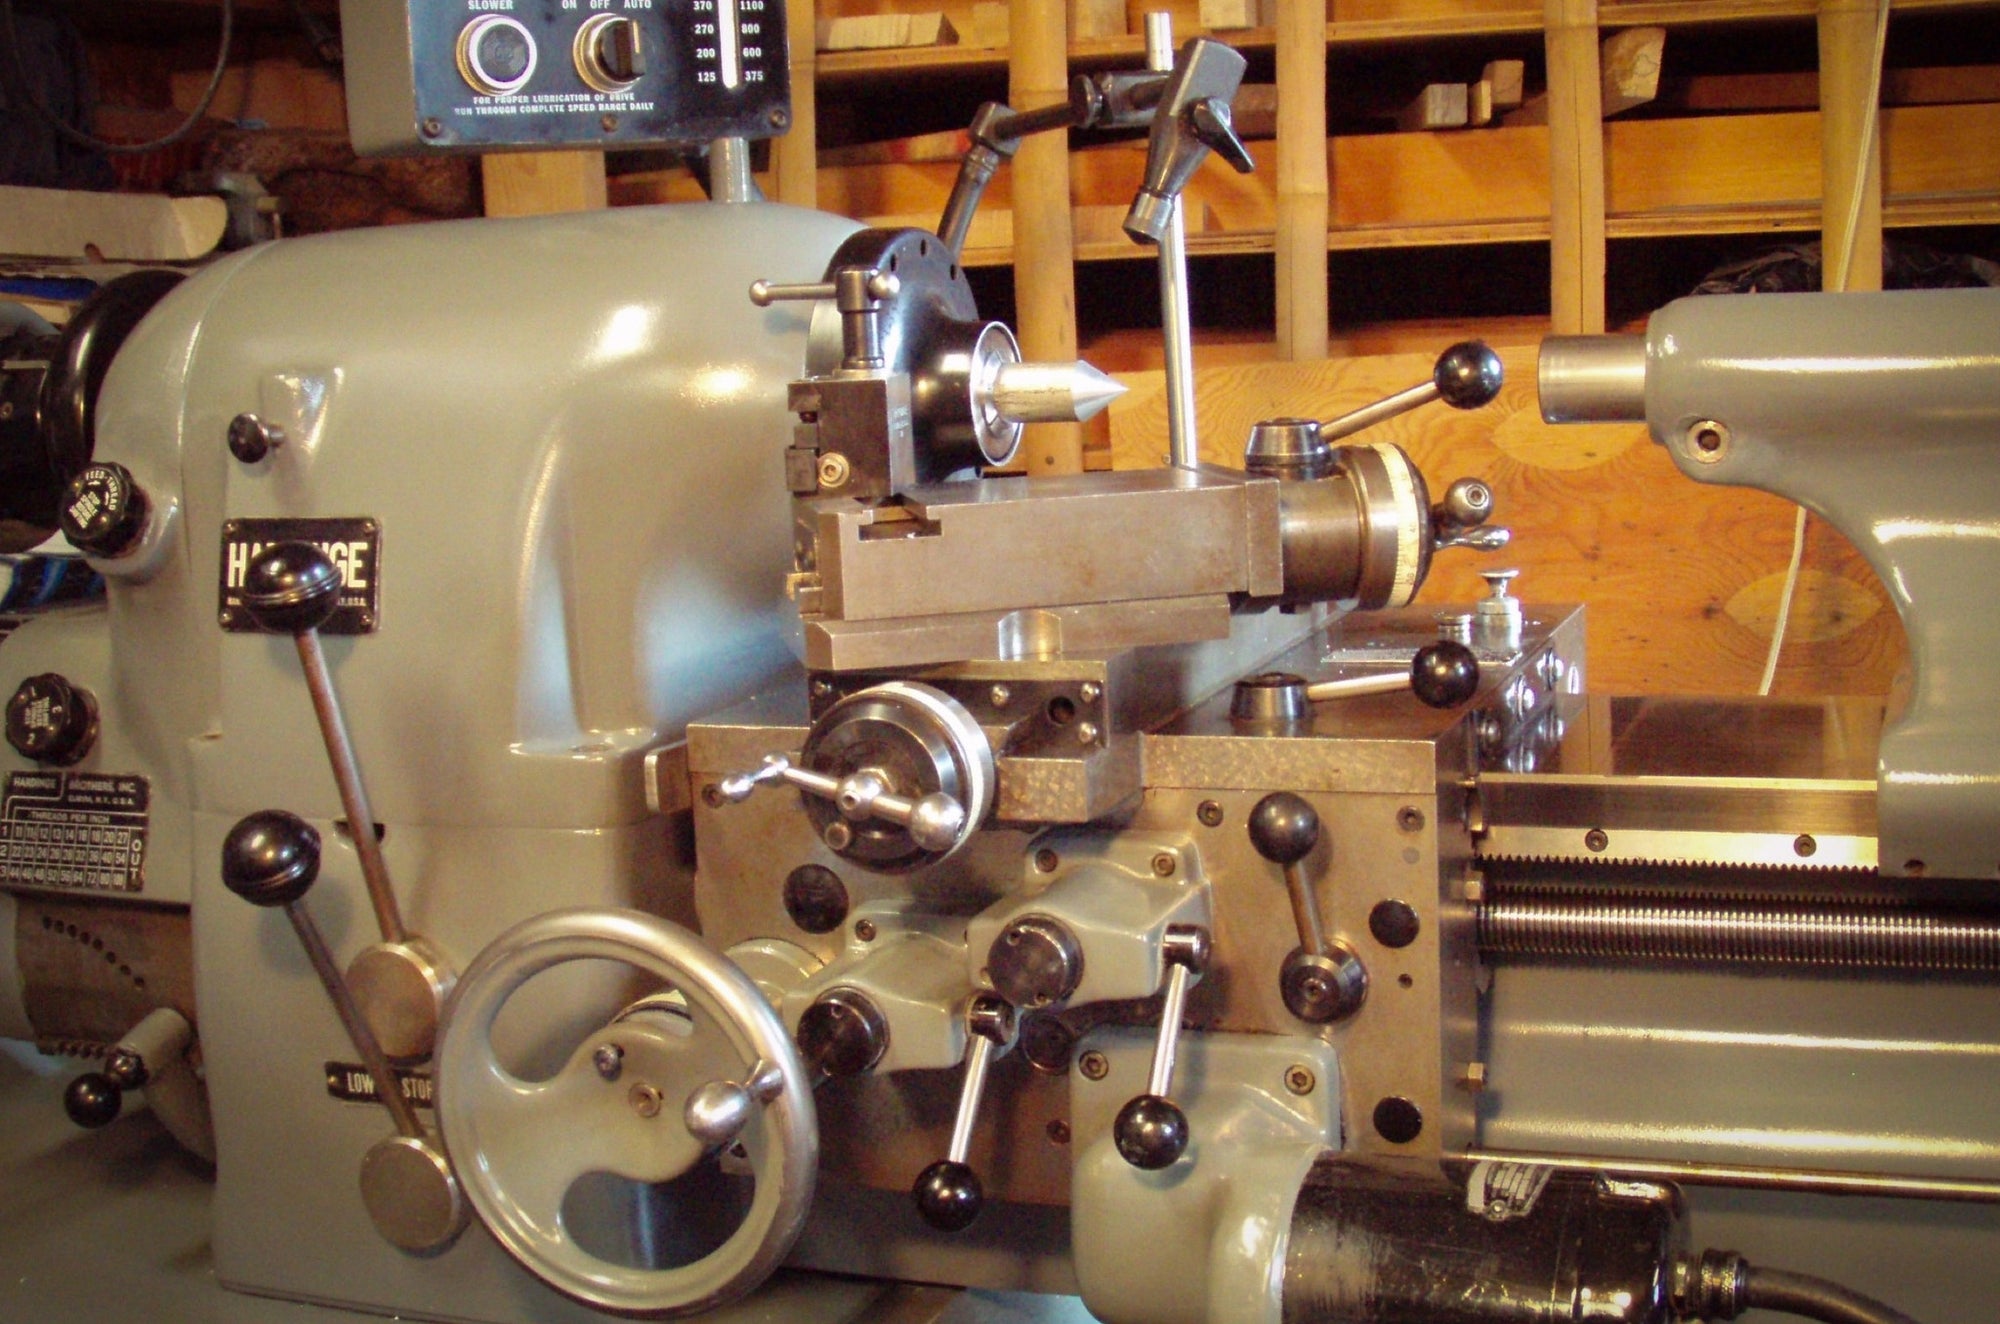 New Lathes for a New Year